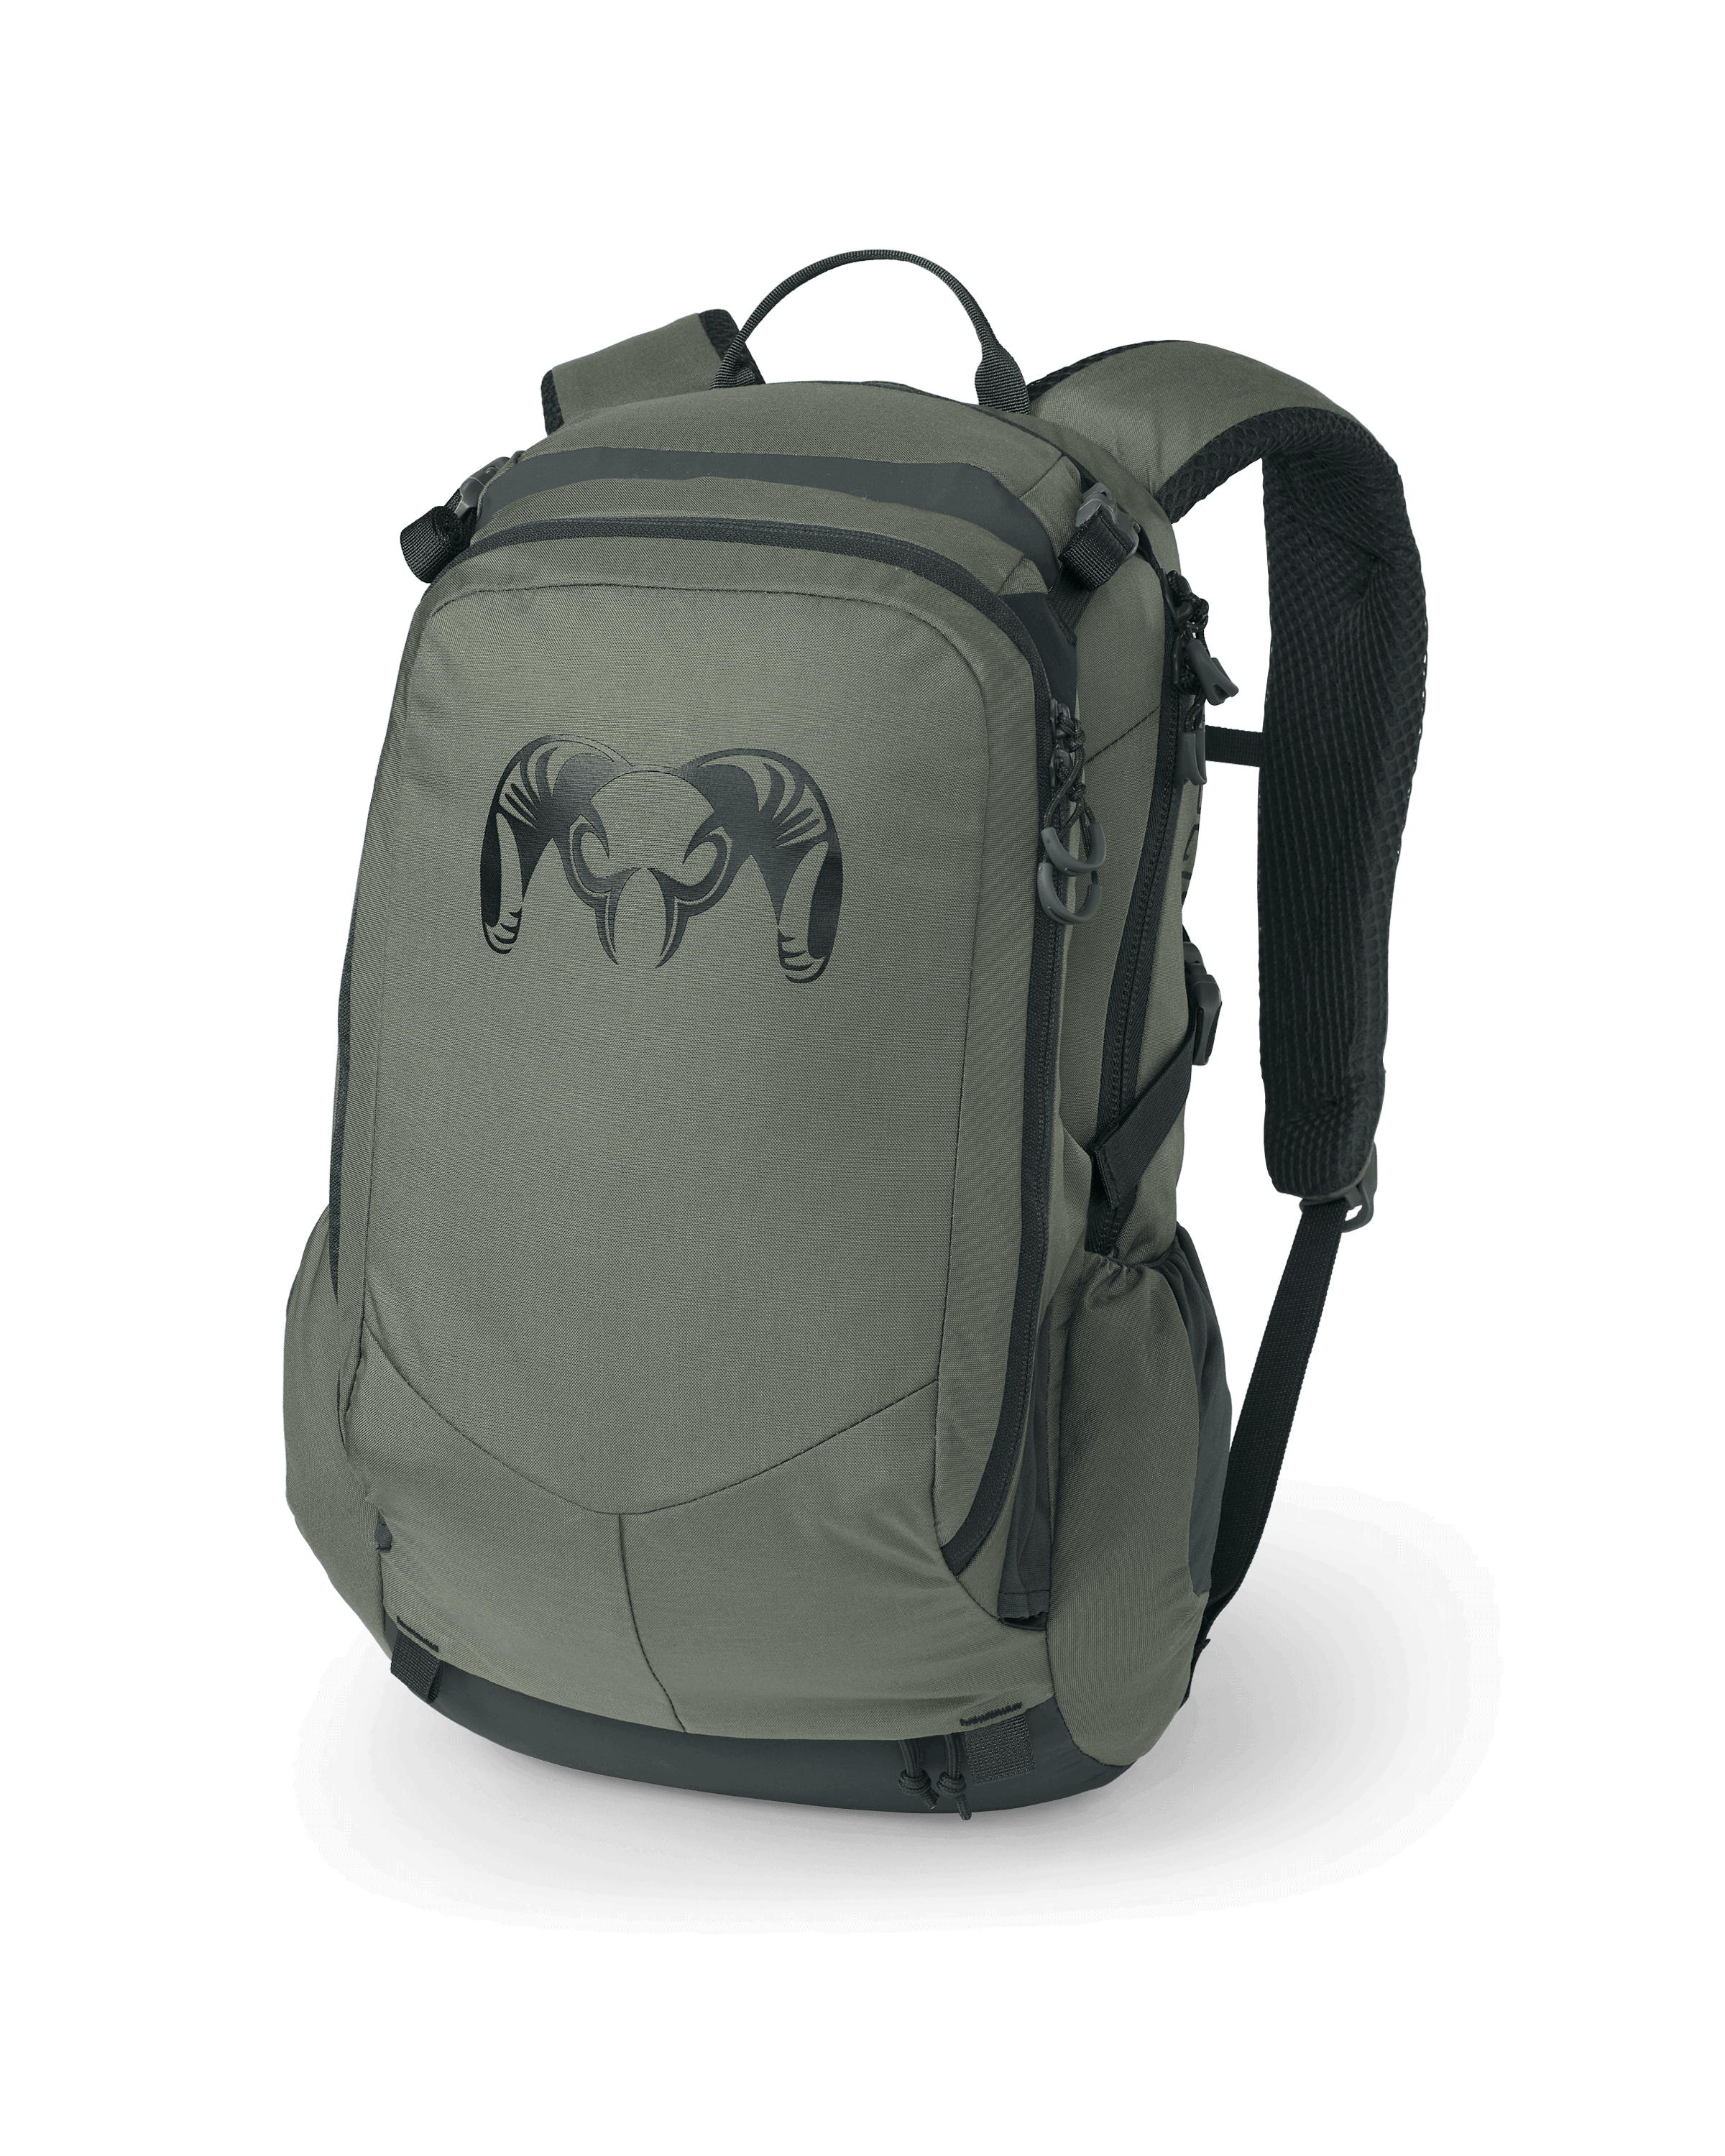 KUIU Divide 1200 Day Bag Pack in Stone Hunting Pack